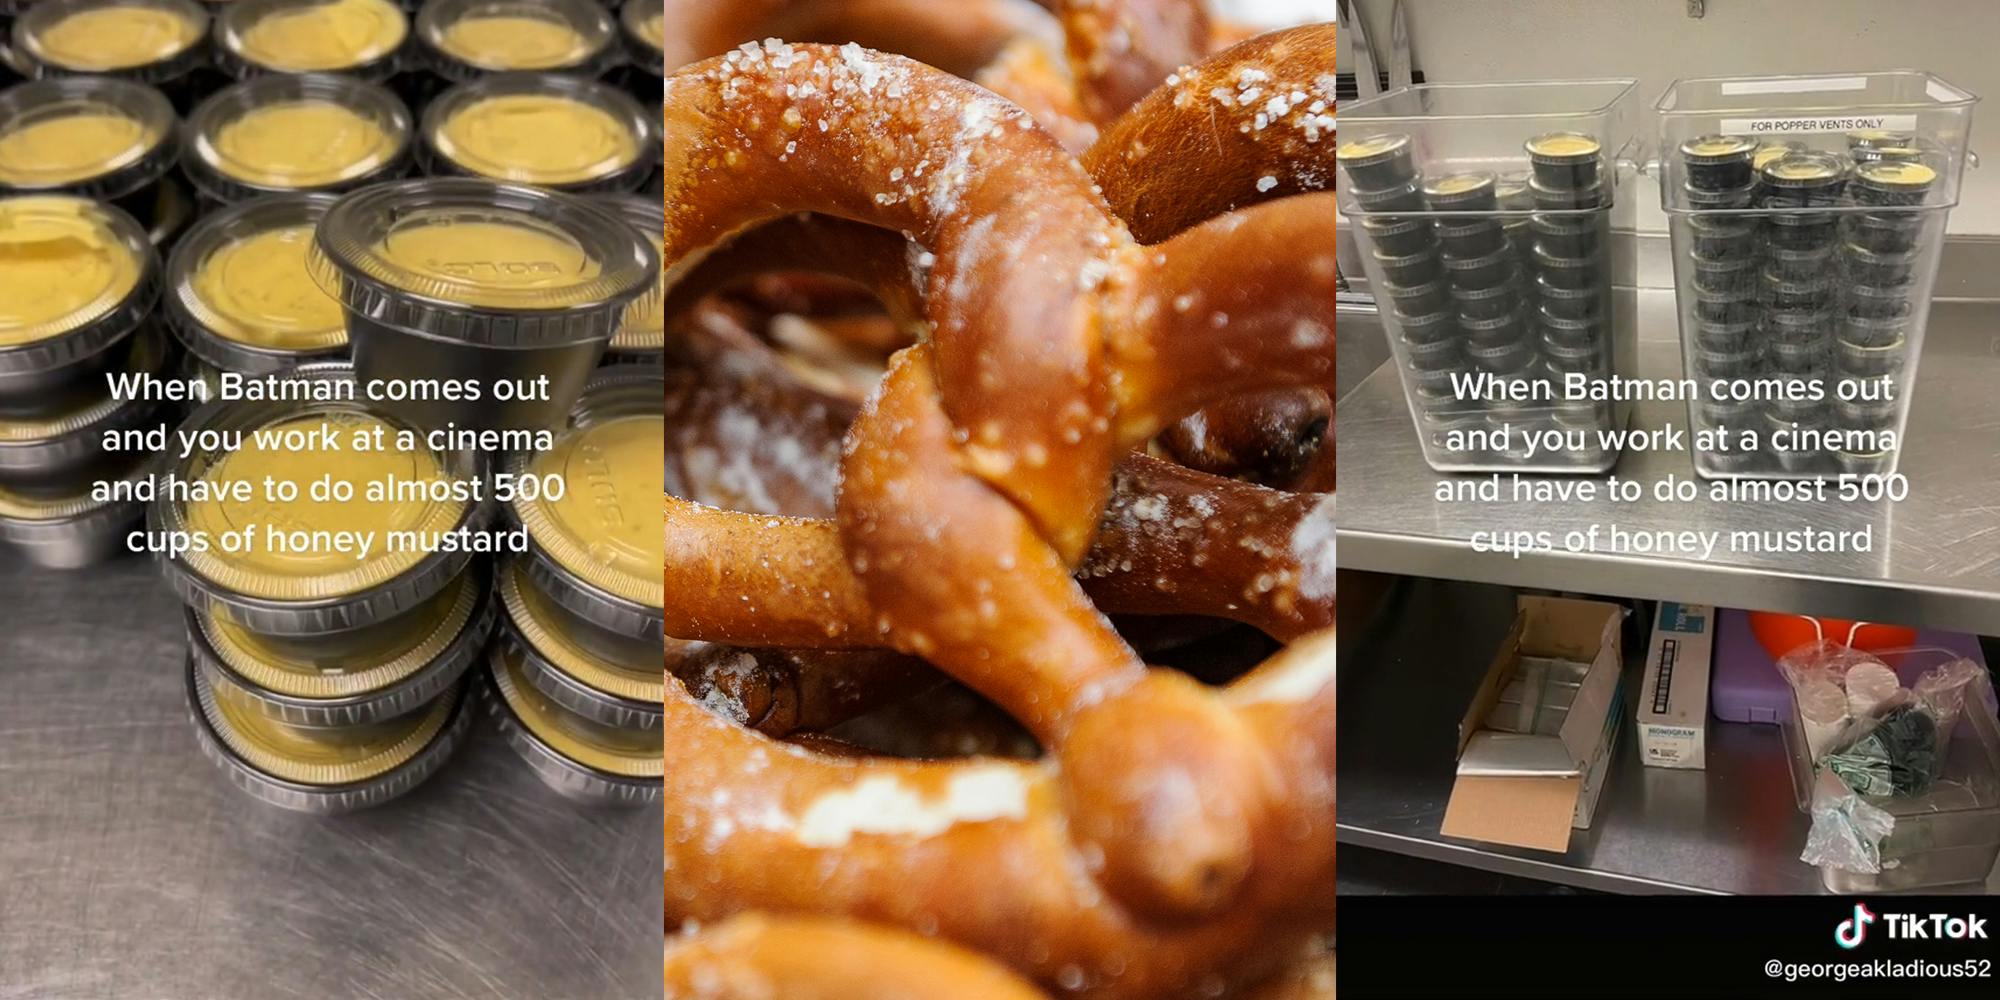 cups of honey mustard with caption "When Batman comes out and you work at a cinema and have to do almost 500 cups of honey mustard" (l&r) pretzels (c)